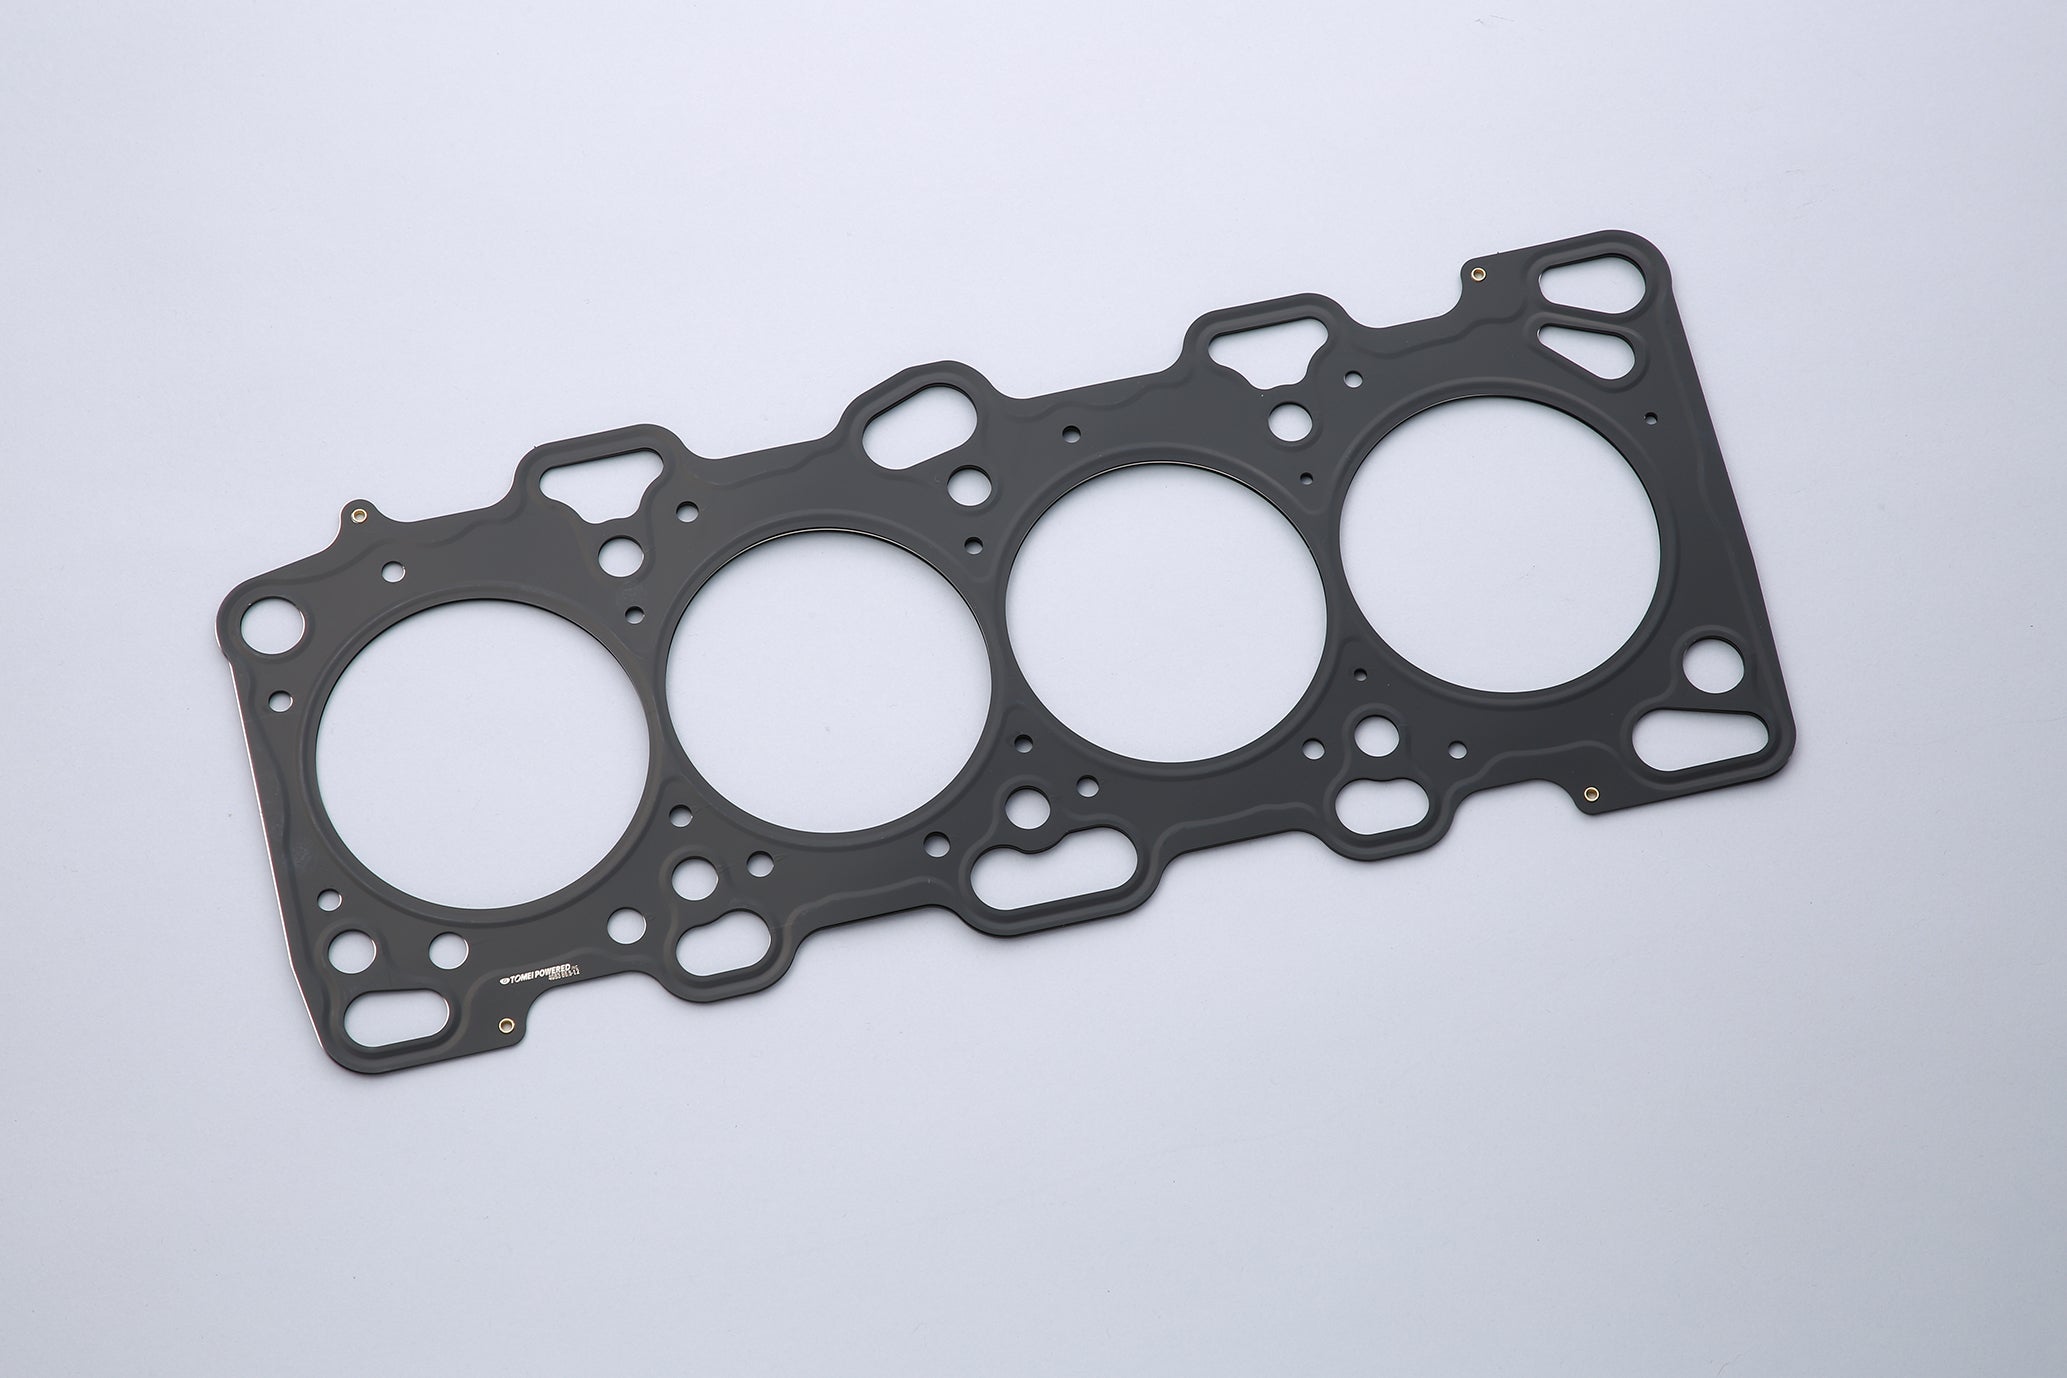 4G63 (EVO IV) Engine Rebuild Package - CP Pistons, Manley Rods & Tomei 1.2mm Head Gasket - 9.0:1 CR